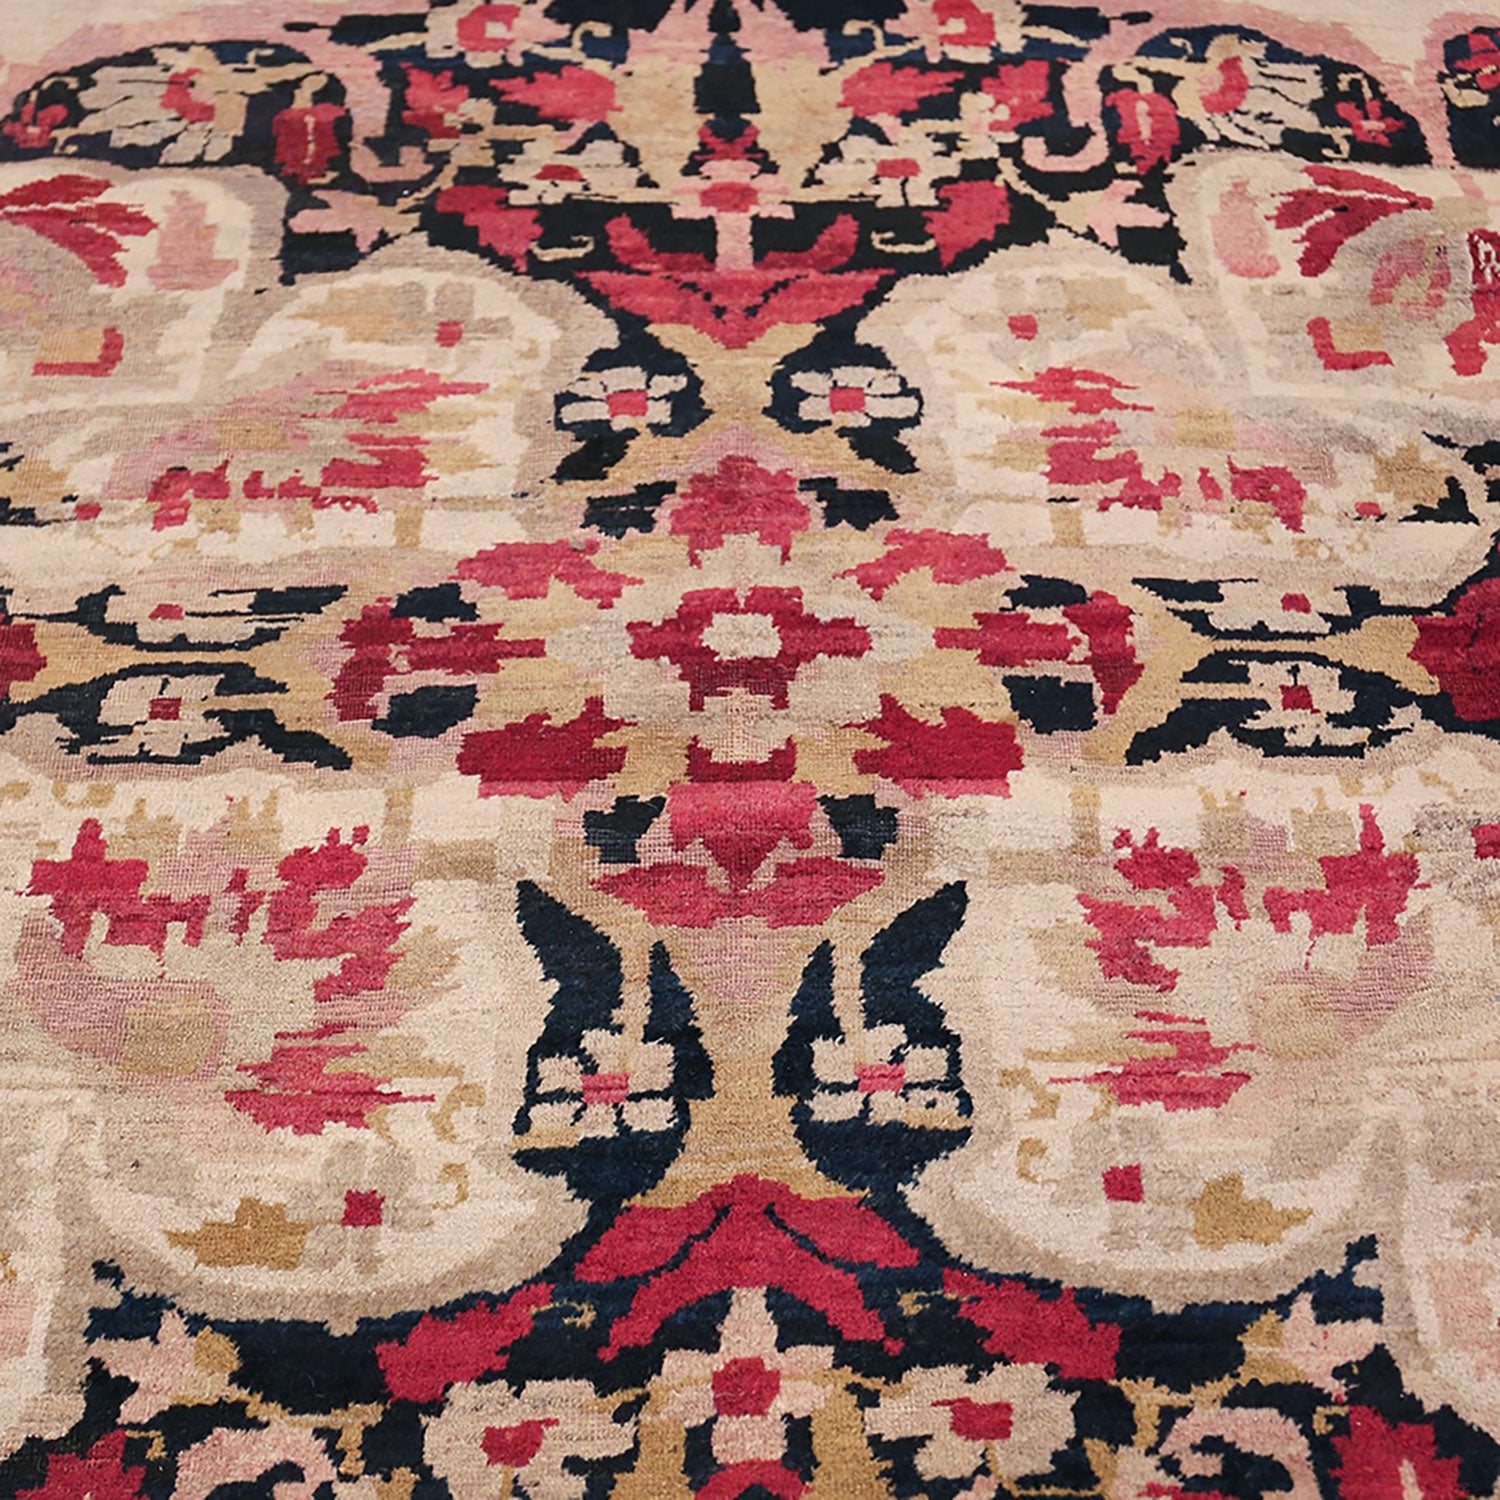 Close-up view of a traditional rug with intricate floral and geometric patterns in shades of red, pink, black, and beige.